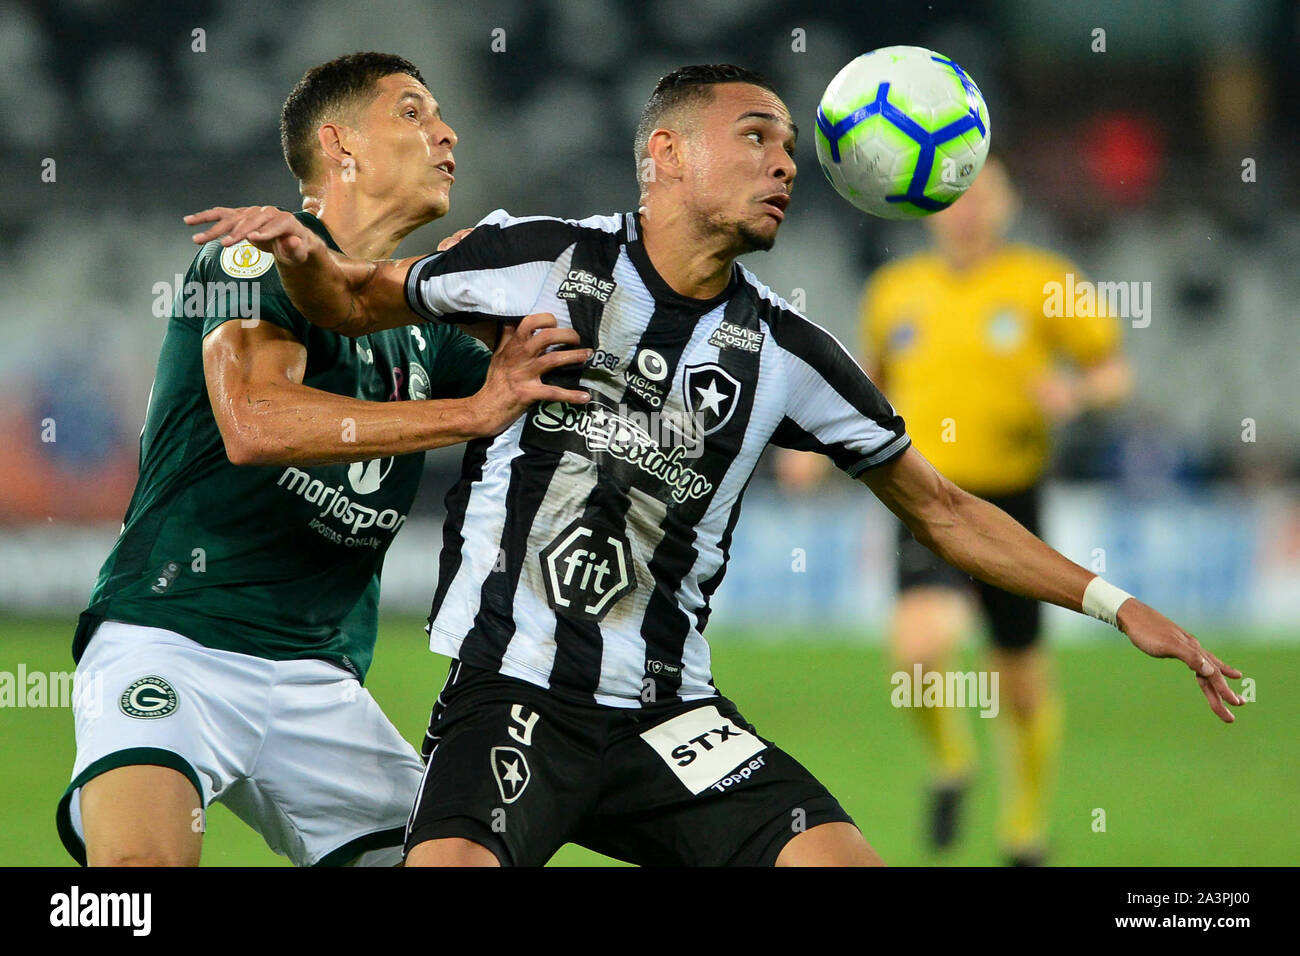 Rio De Janeiro, Brazil. 09th Oct, 2019. Luiz Fernando and L. Barcia during Botafogo vs Goiás, match valid for the 24th round of the Brazilian Championship, held at Nilton Santos Stadium, located in the city of Rio de Janeiro, on Wednesday night (09). Credit: Celso Pupo/FotoArena/Alamy Live News Stock Photo